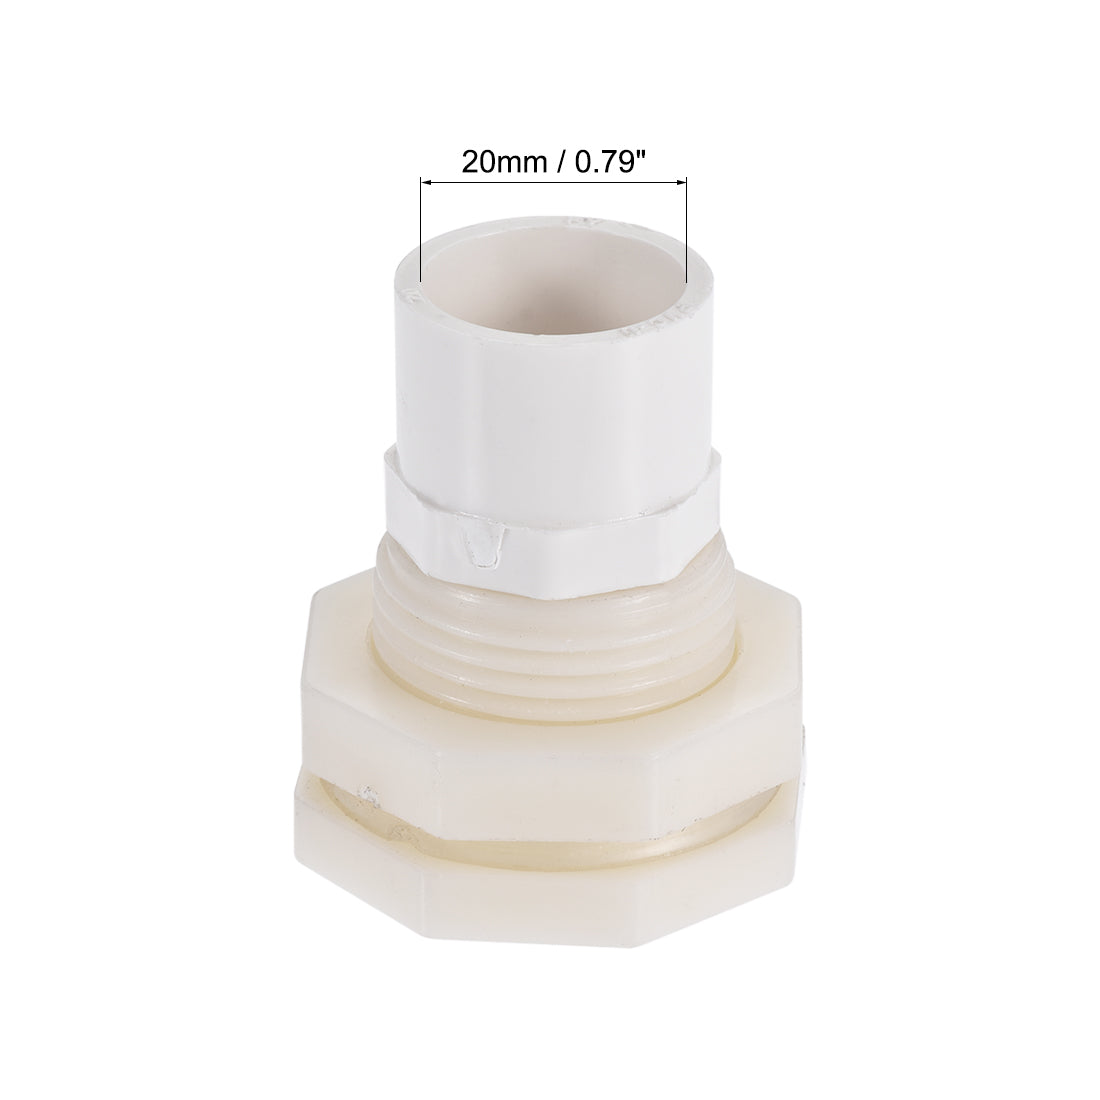 uxcell Uxcell Bulkhead Fitting, G1/2 Female 1.12" Male, Tube Adaptor Fitting, with Silicone Gasket and Pipe Connector, for Water Tanks, PVC, White, Pack of 4